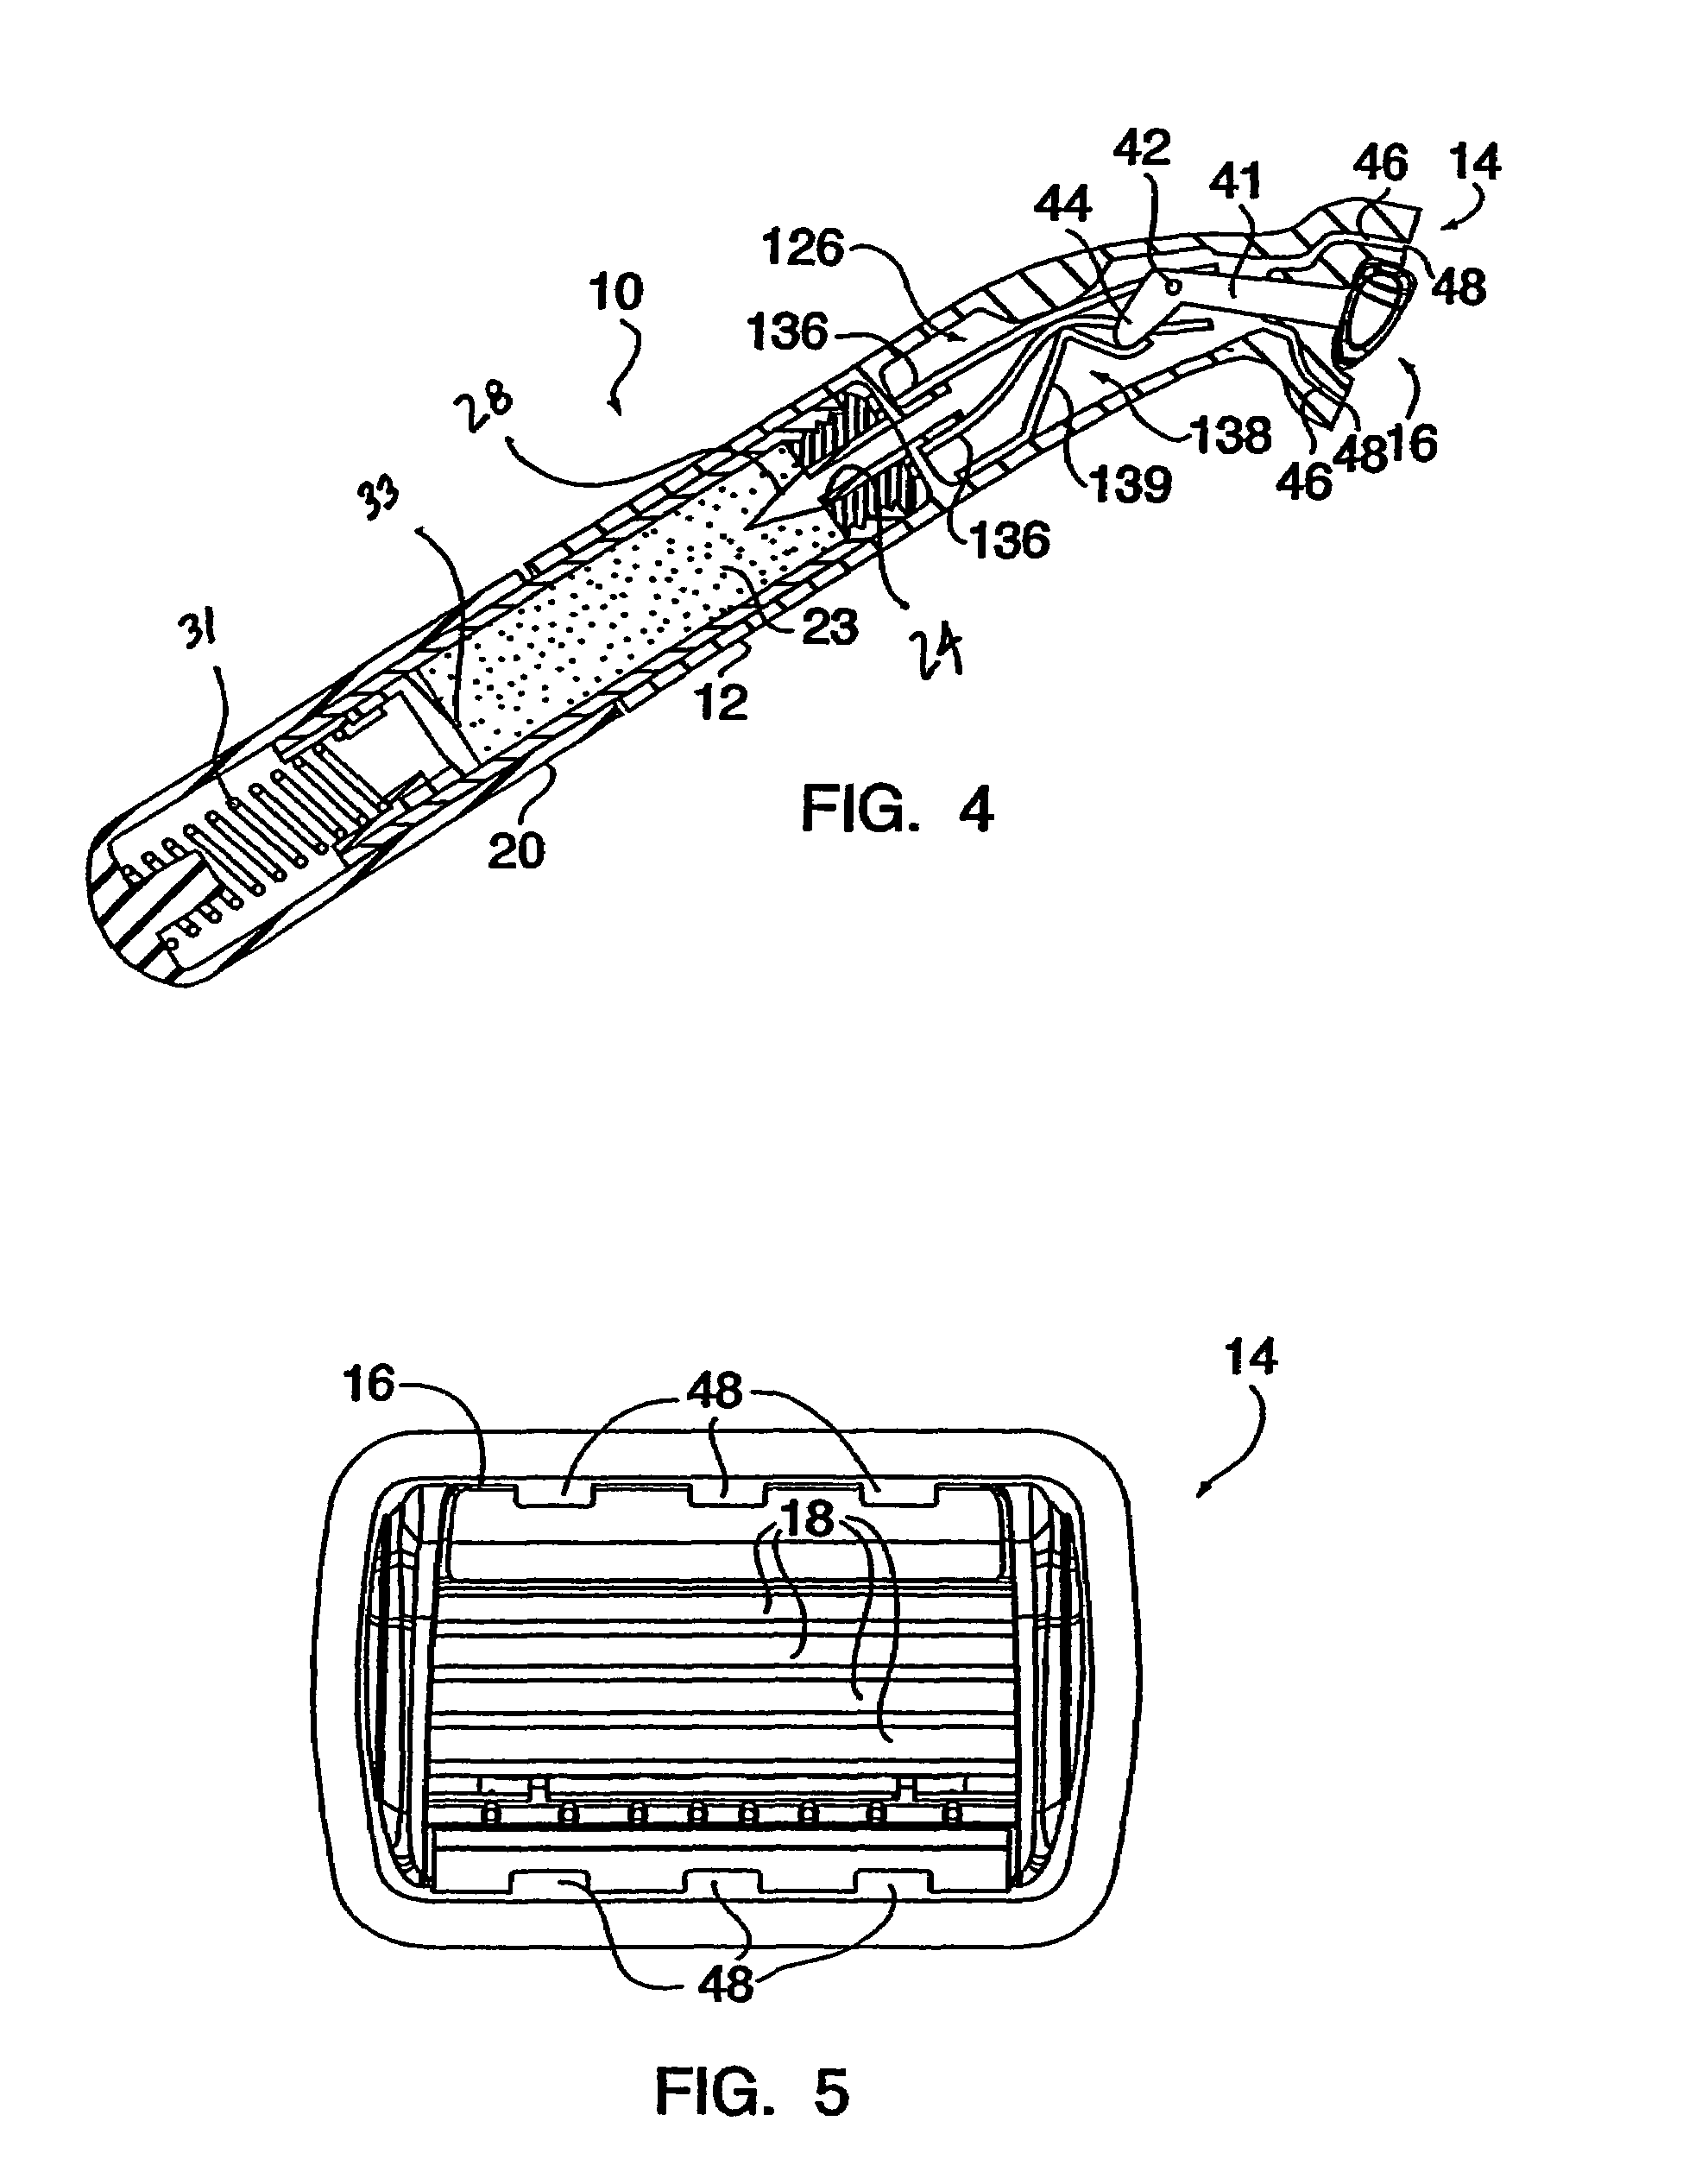 Shaving apparatus with pivot-actuated valve for delivery of shaving aid material